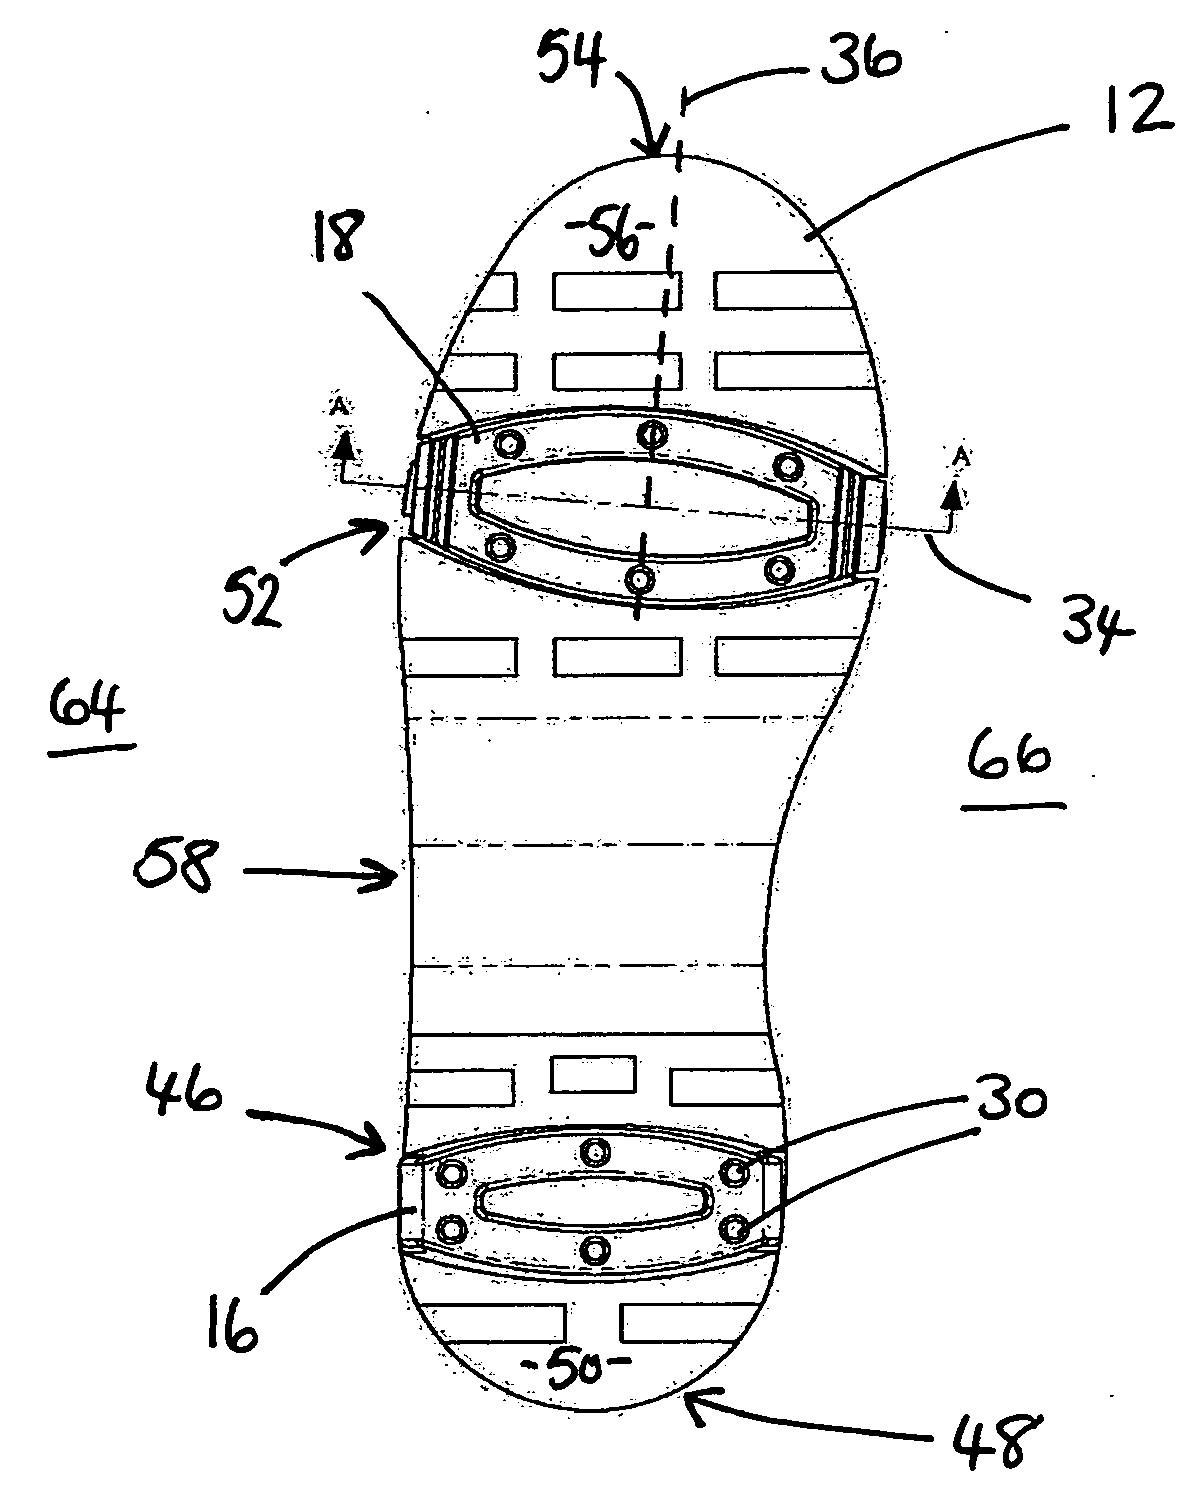 Attachments for an item of footwear